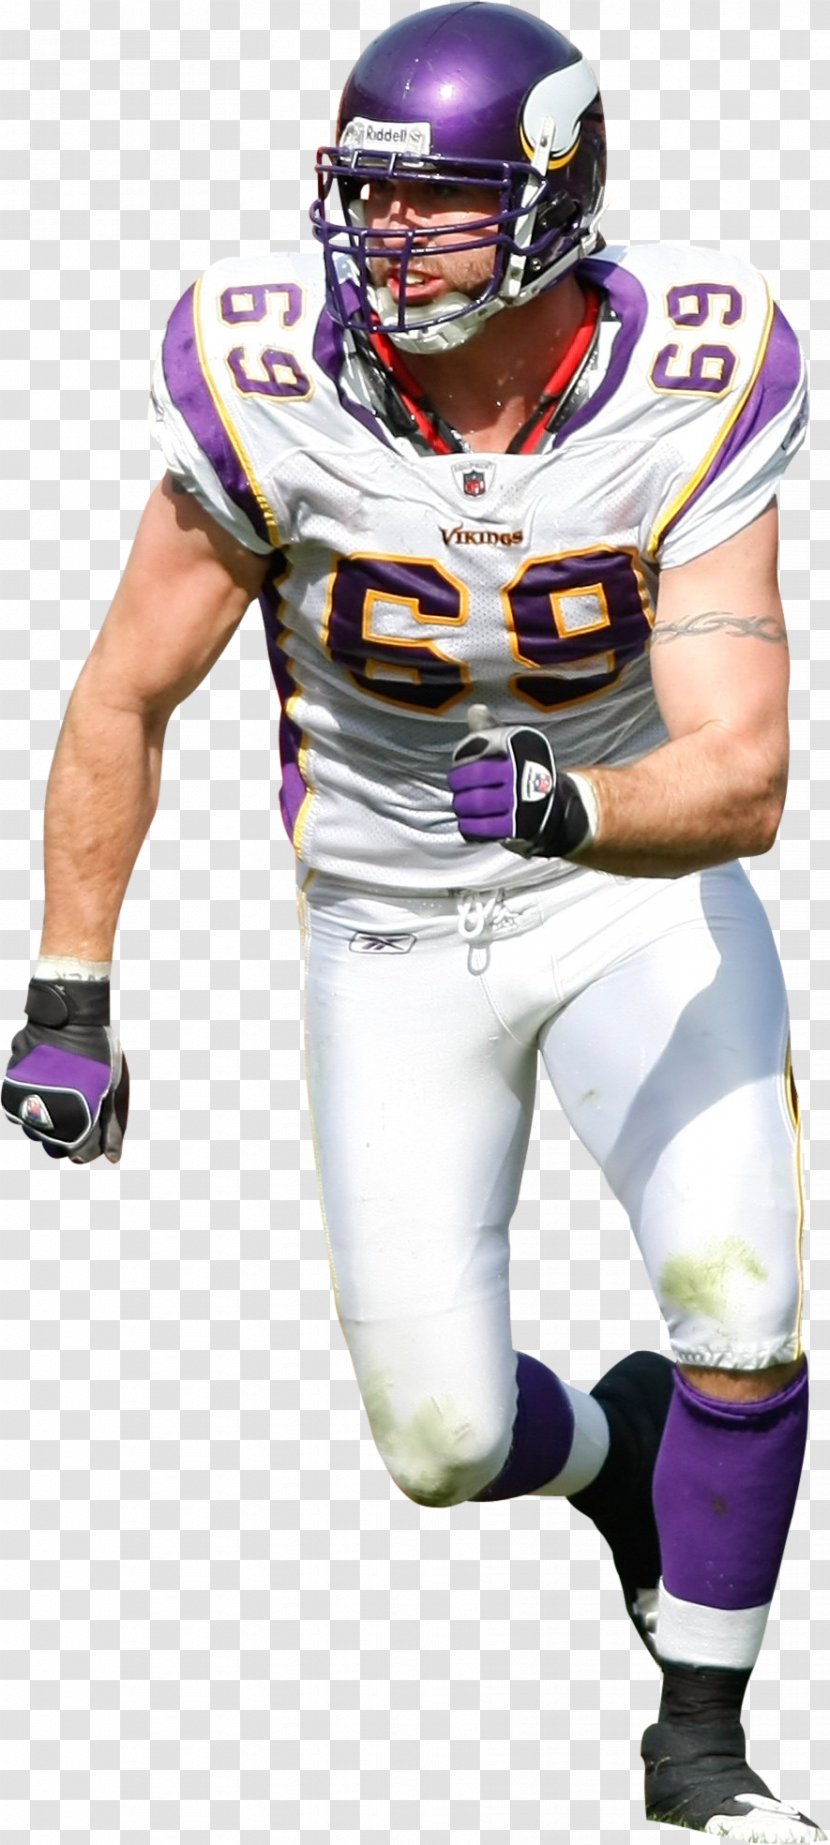 NFL United States American Football Player - Sports Uniform Transparent PNG